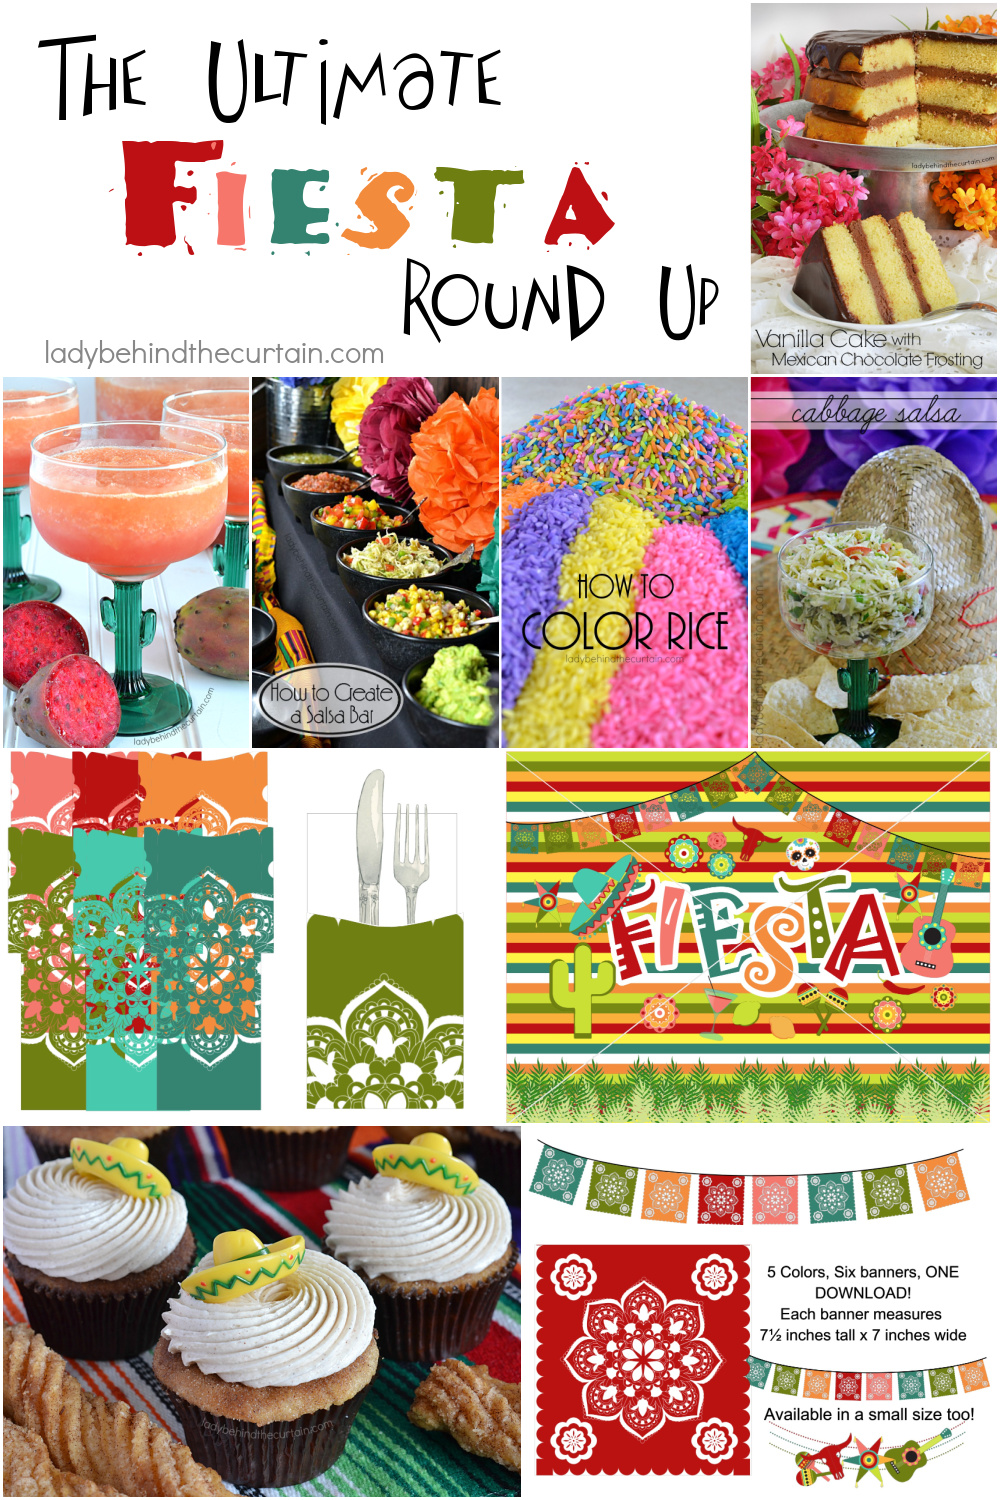 The Ultimate Fiesta Round Up